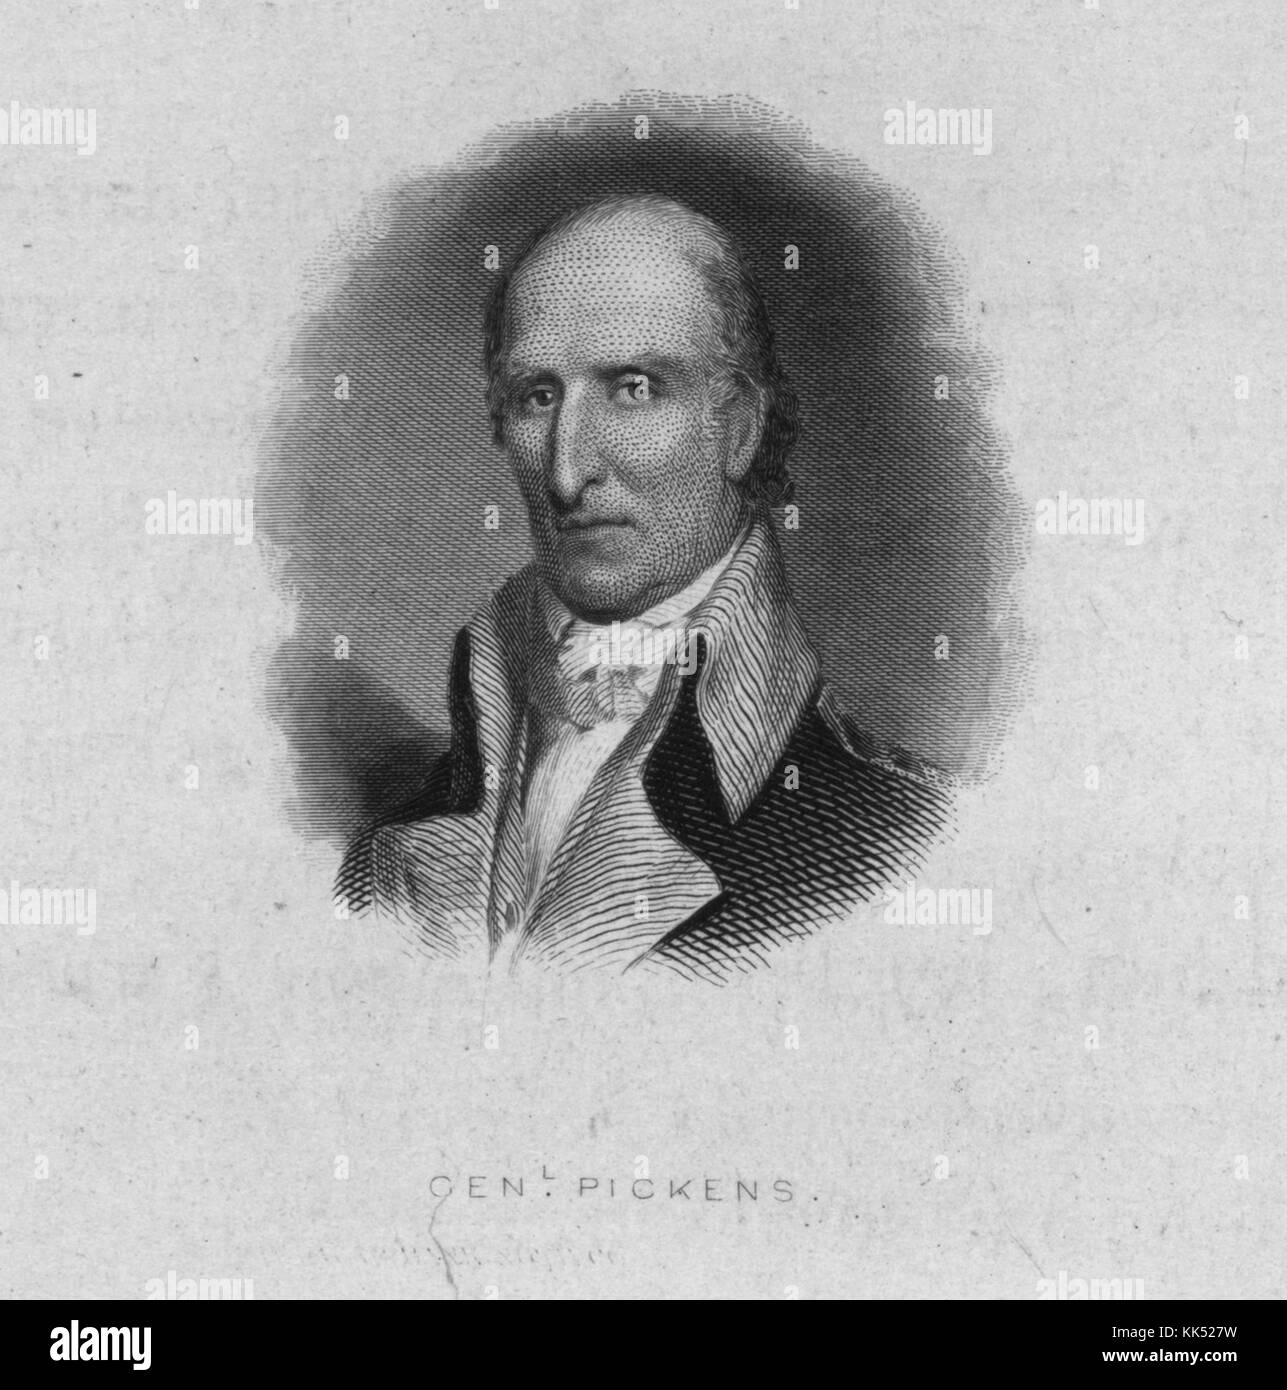 An engraving from a portrait of Andrew Pickens, he rose to the rank of Brigadier General as member of the South Carolina state militia during the American Revolutionary War, he was also a member of the United States House of Representatives from South Carolina, 1800. From the New York Public Library. Stock Photo